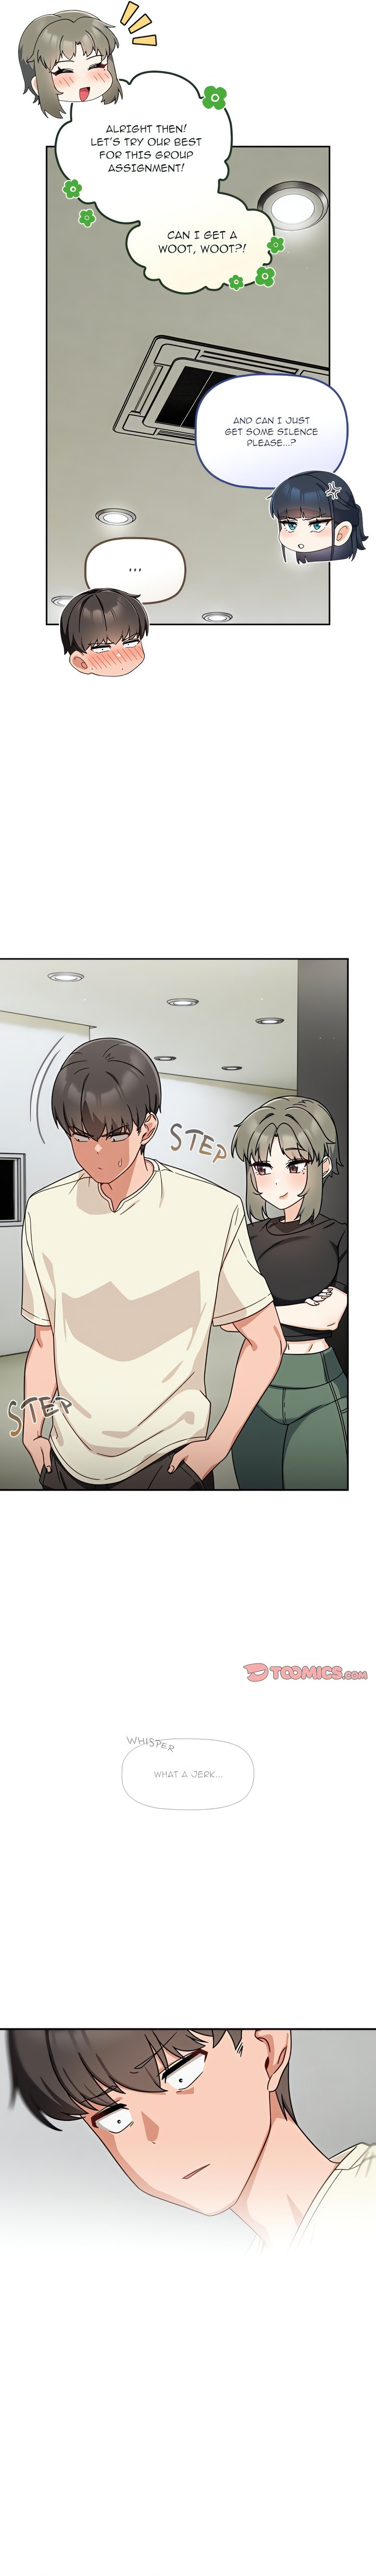 #Follow Me - Chapter 32 Page 8